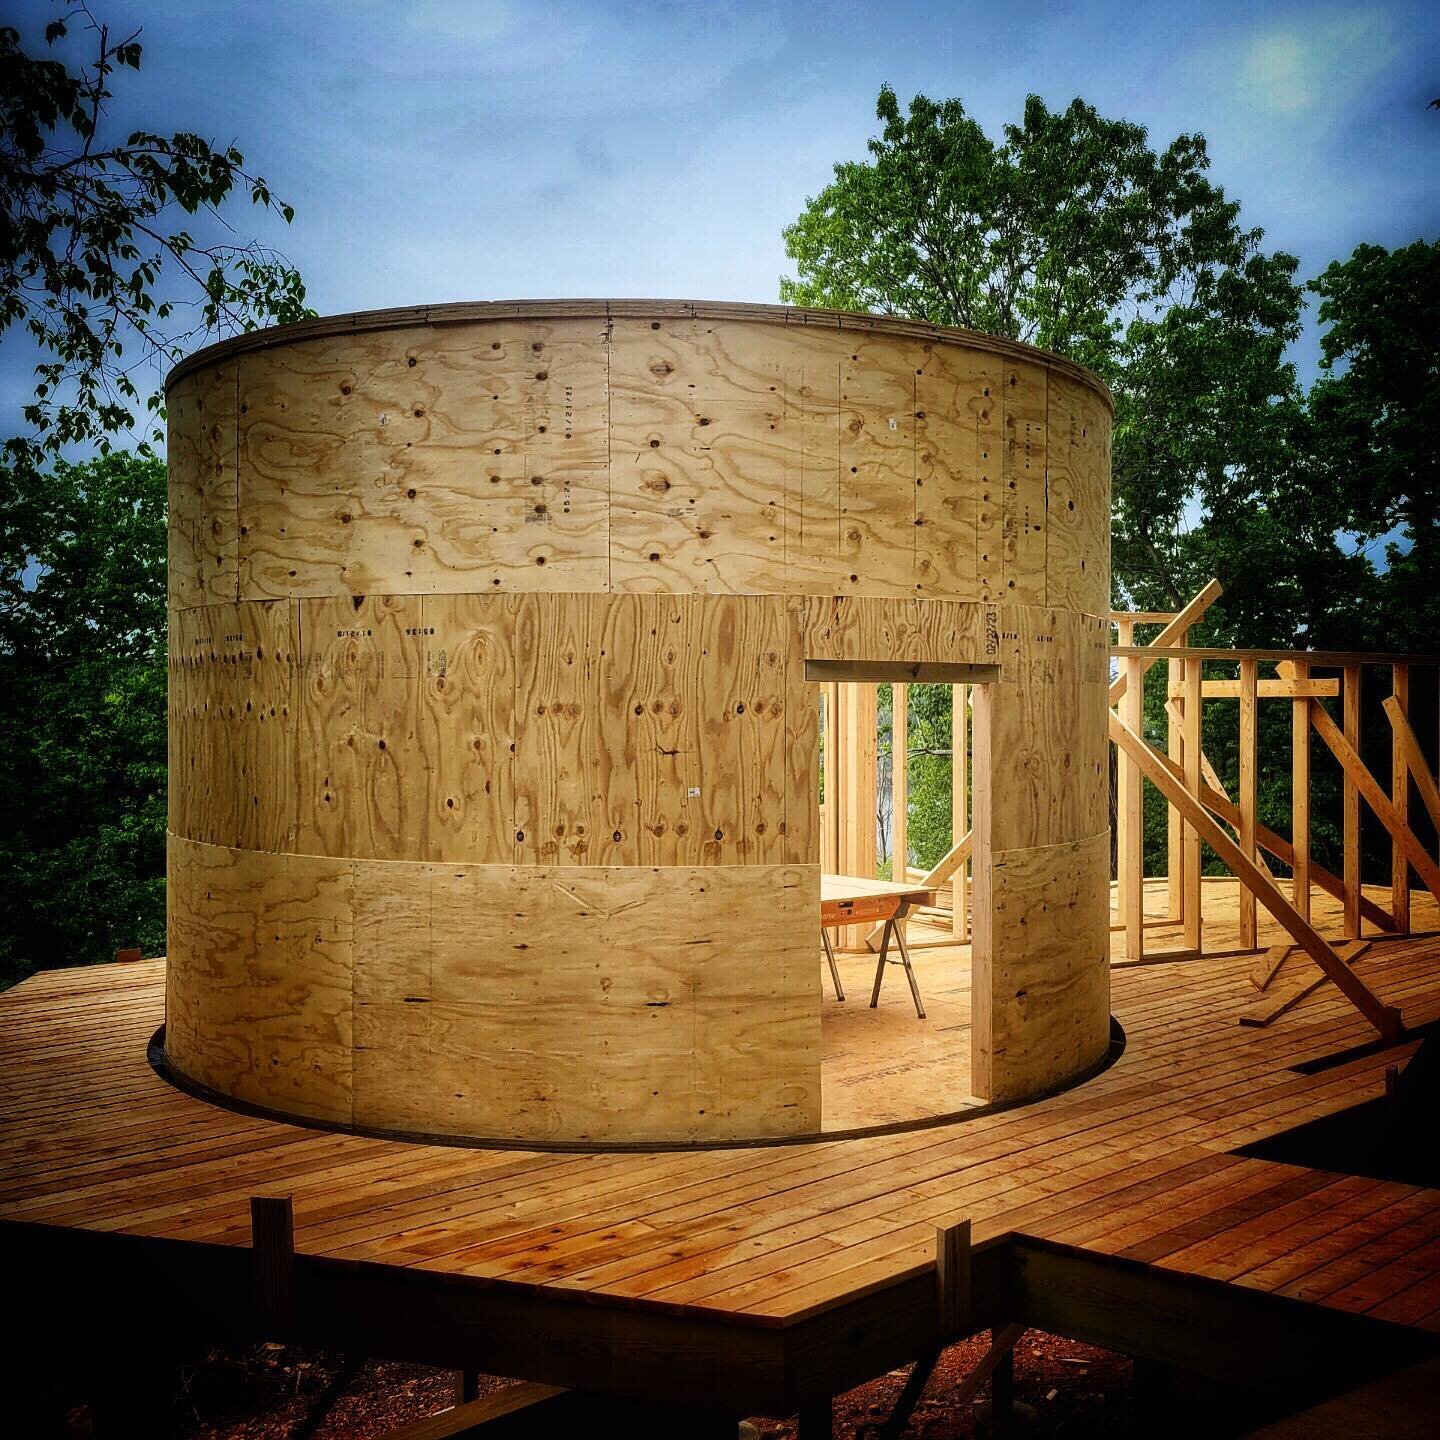 Progress at the Planetarium Treehouse - the first dome will be going up soon!
.
#airbnbomg #treehouse